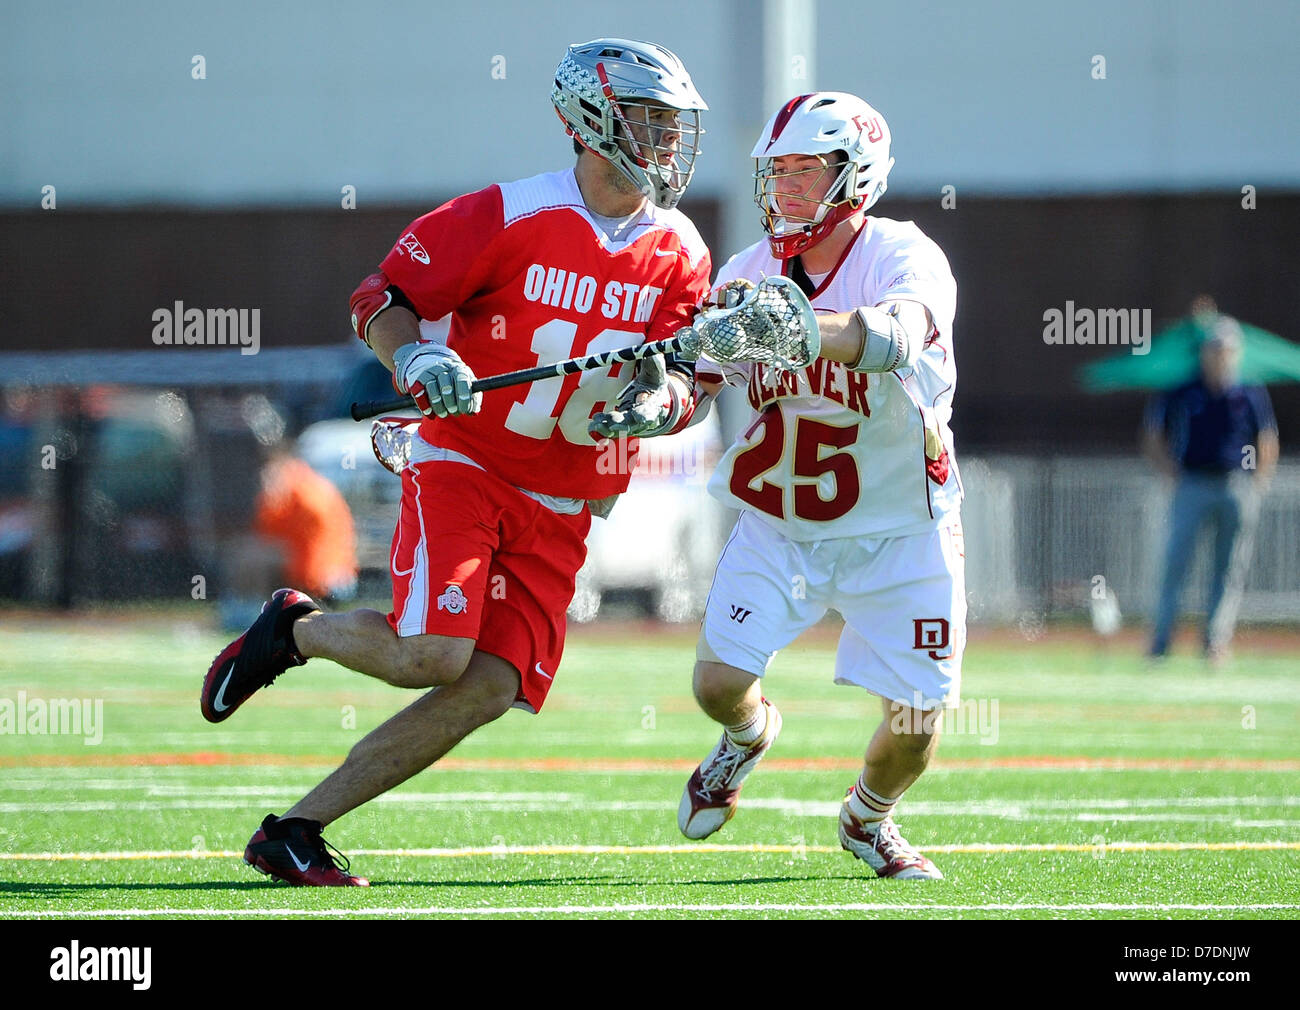 May 4, 2013 - Geneva, New York, USA - May 4, 2013: Ohio State Buckeyes attackman Logan Schuss #18 drives to the goal around Denver Pioneers midfielder Garret Holst #25 during the second quarter of the 2013 ECAC Men's Lacrosse Tournament Championship game between the Ohio State Buckeyes and the Denver Pioneers at Boswell Field in Geneva, New York. Ohio State won the game 11-10. Stock Photo